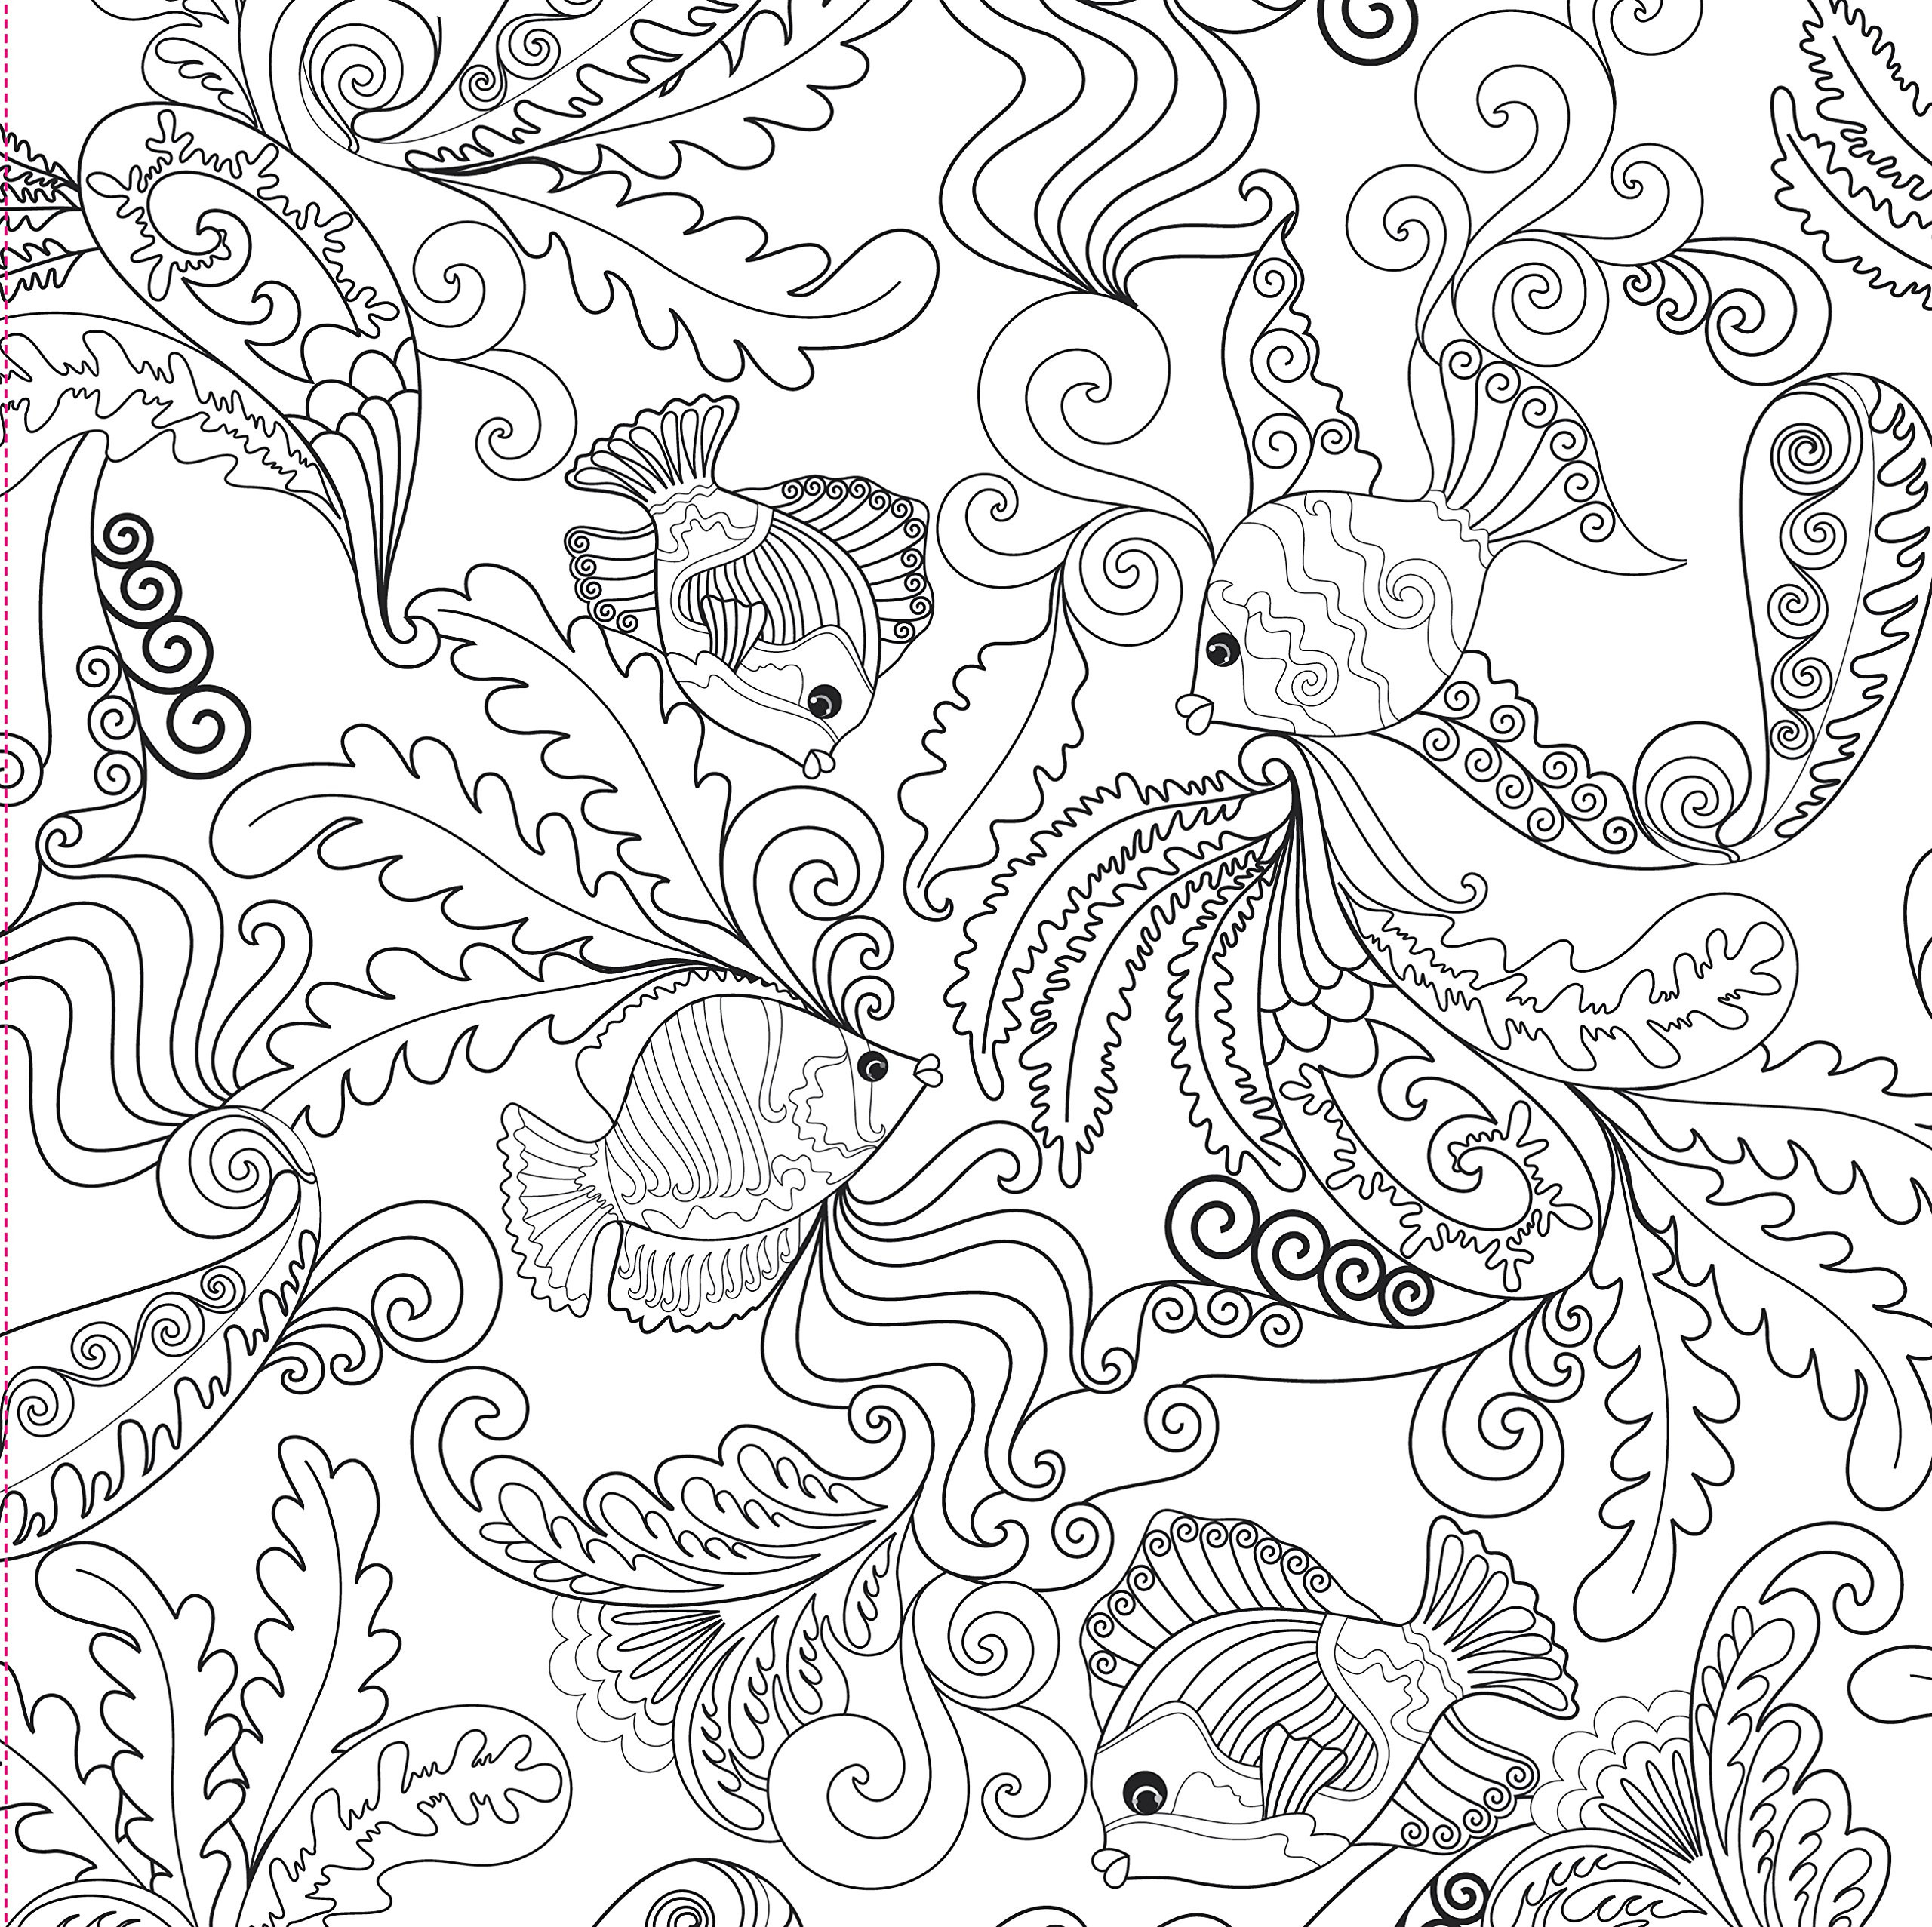 ocean-life-coloring-pages-at-getcolorings-free-printable